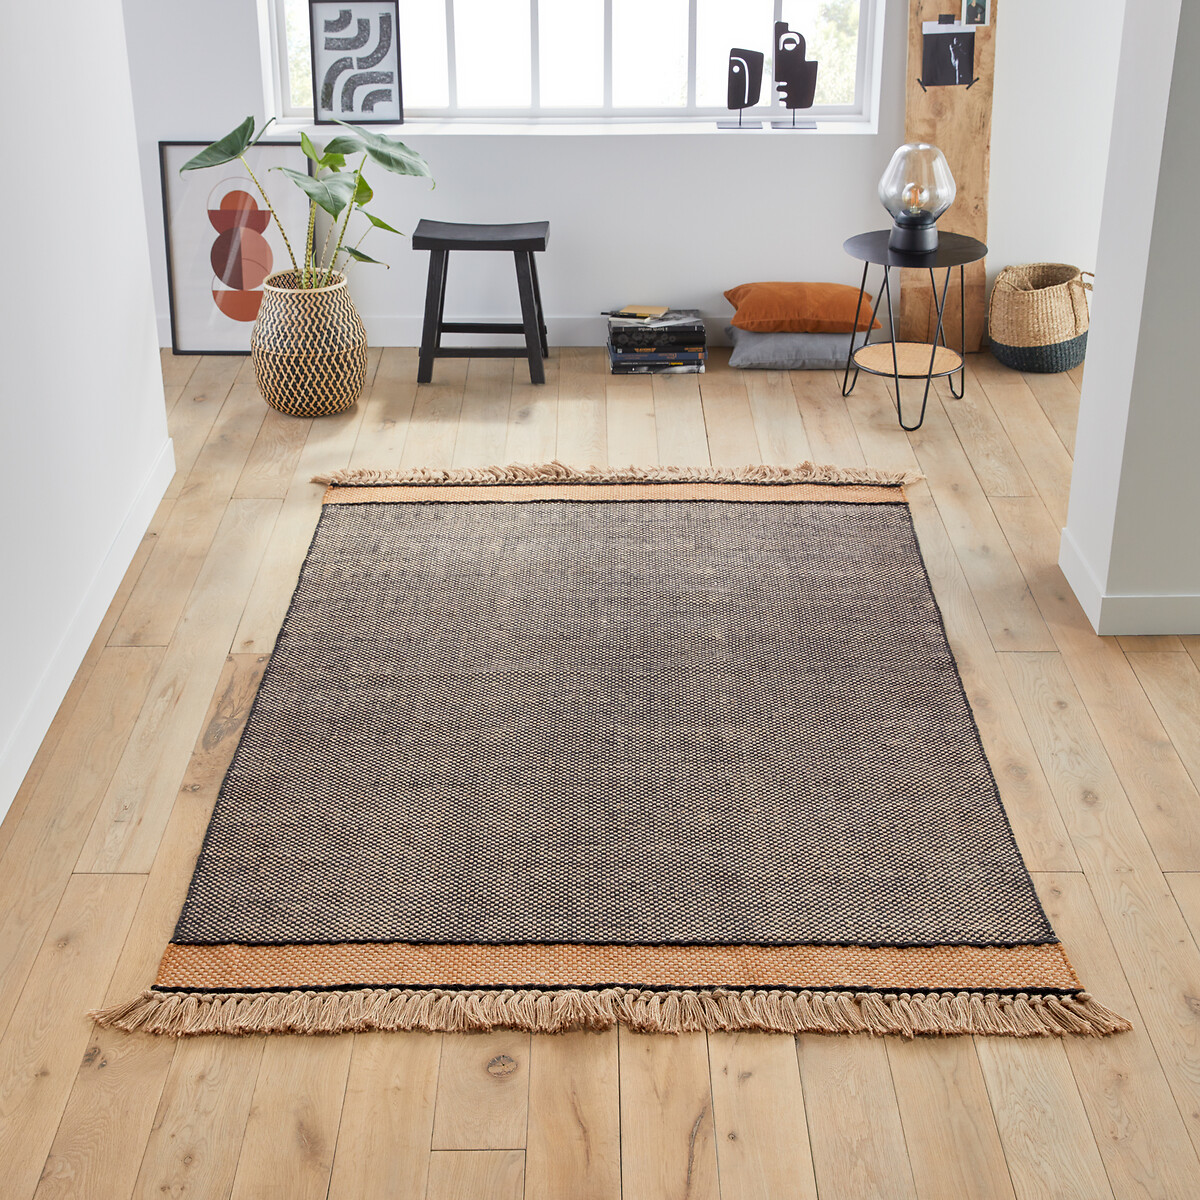 Holza jute & chenille rug natural La Redoute Interieurs